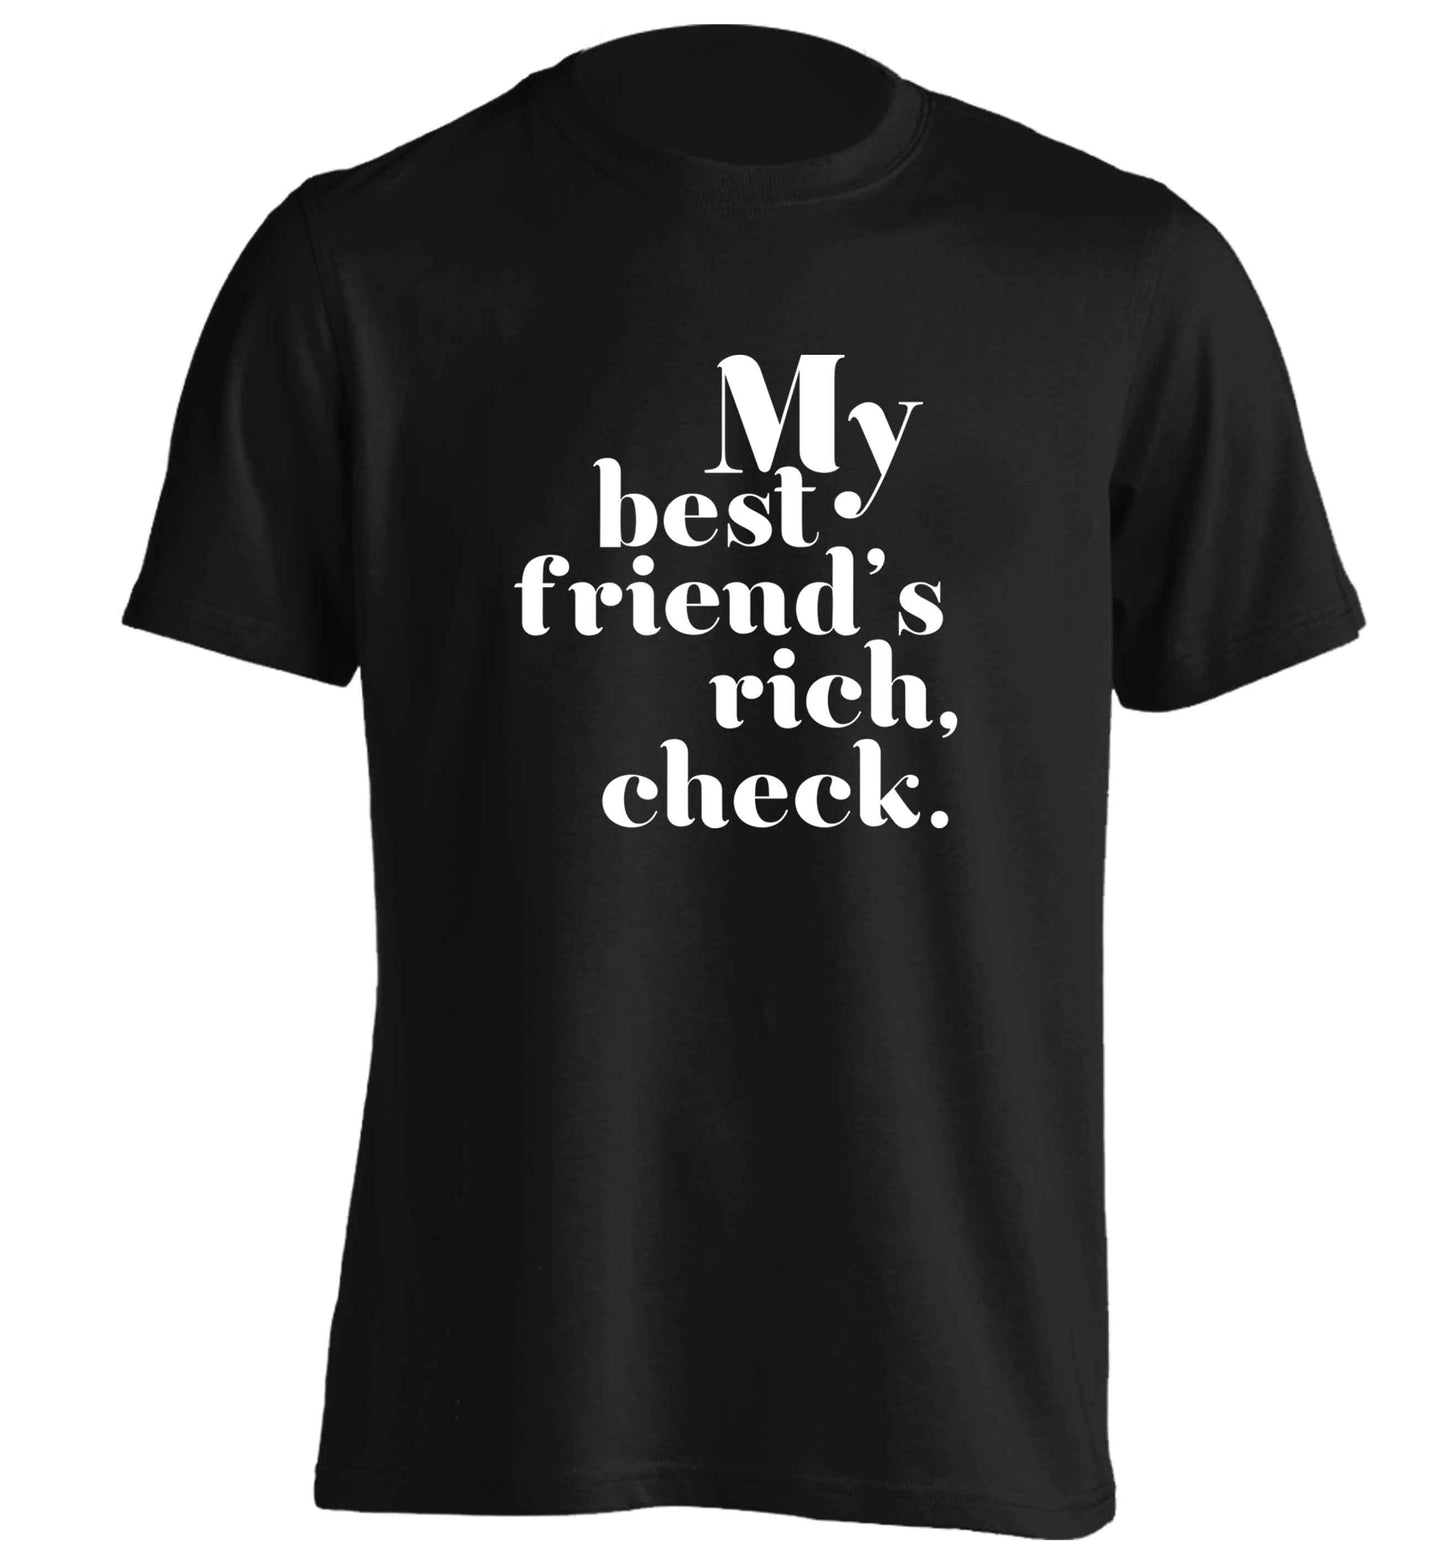 Got a rich best friend? Why not ask them to get you this, just let us  know and we'll tripple the price ;)  adults unisex black Tshirt 2XL